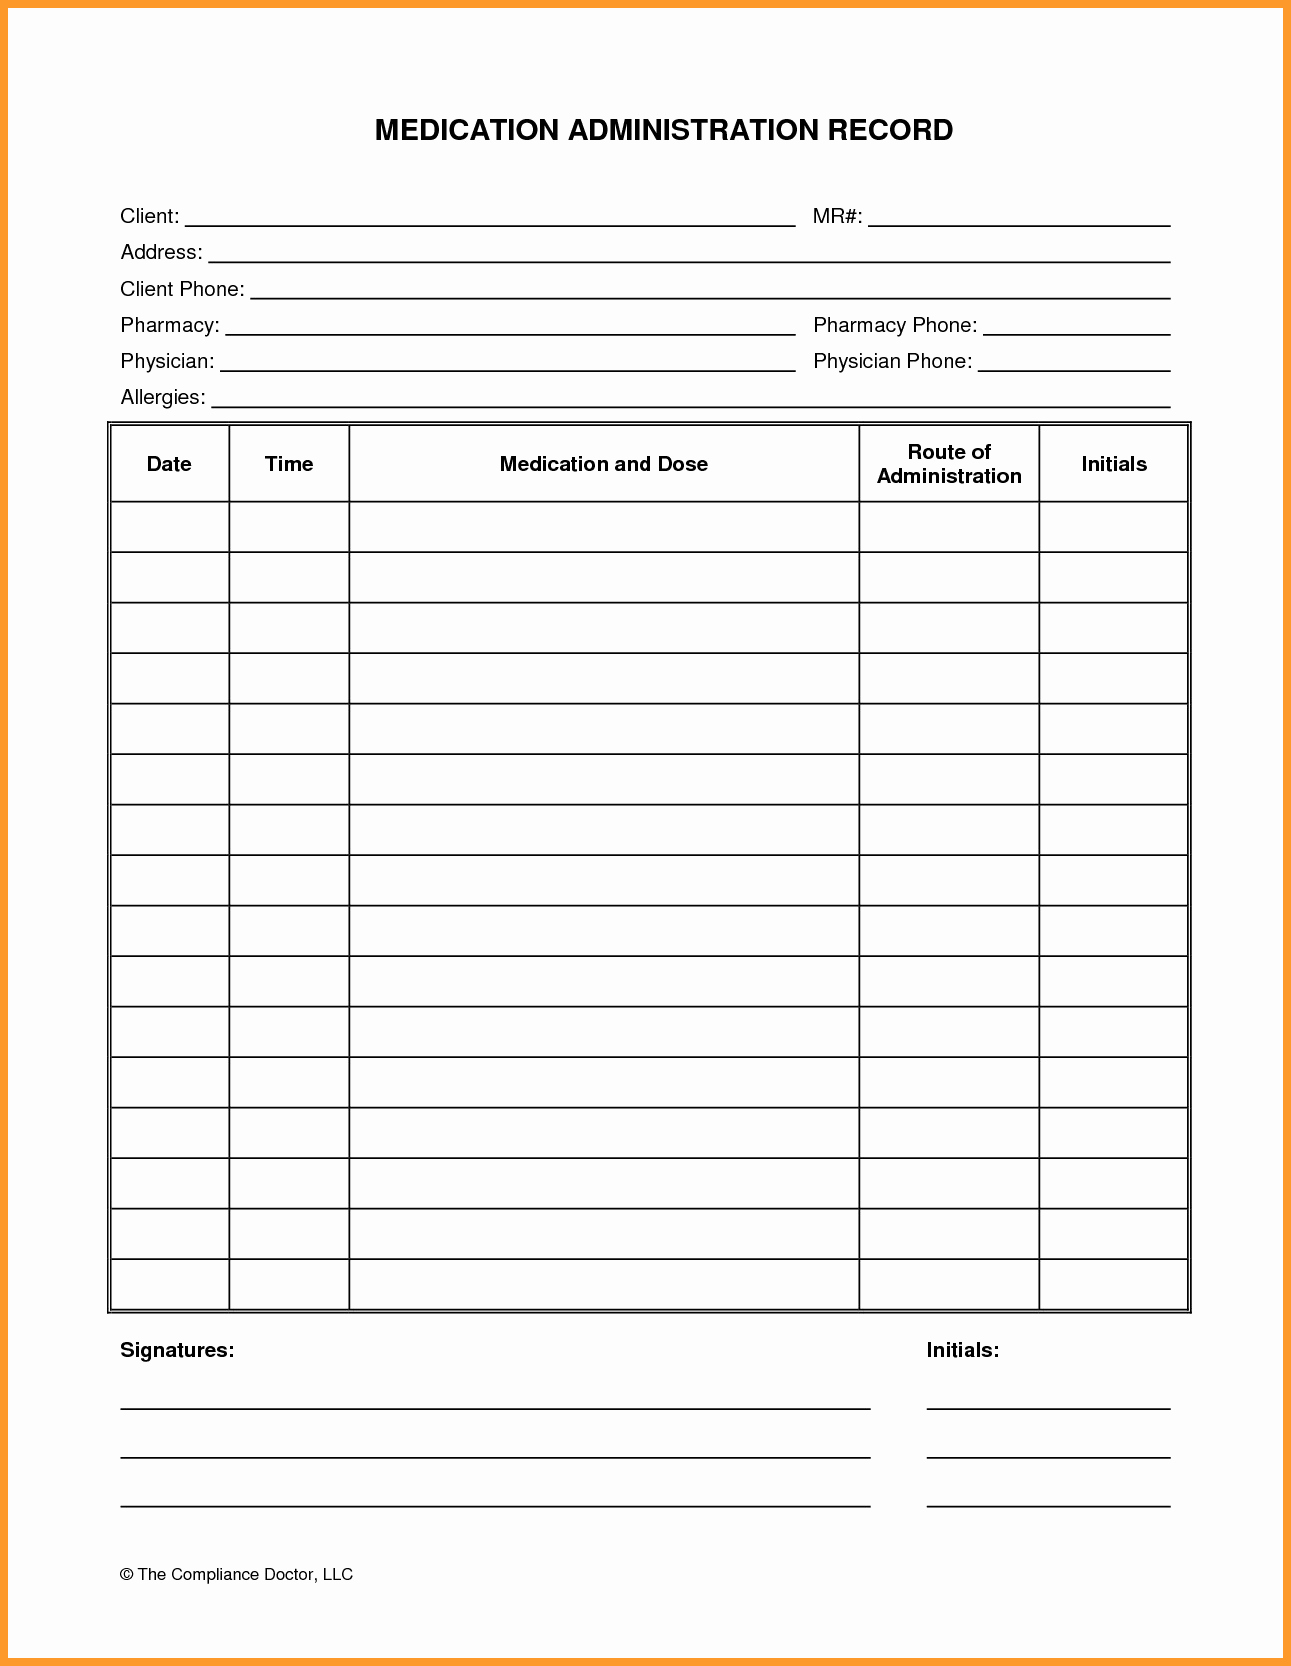 Medication Administration Records Template Inspirational 4 5 Medical Administration Record Template